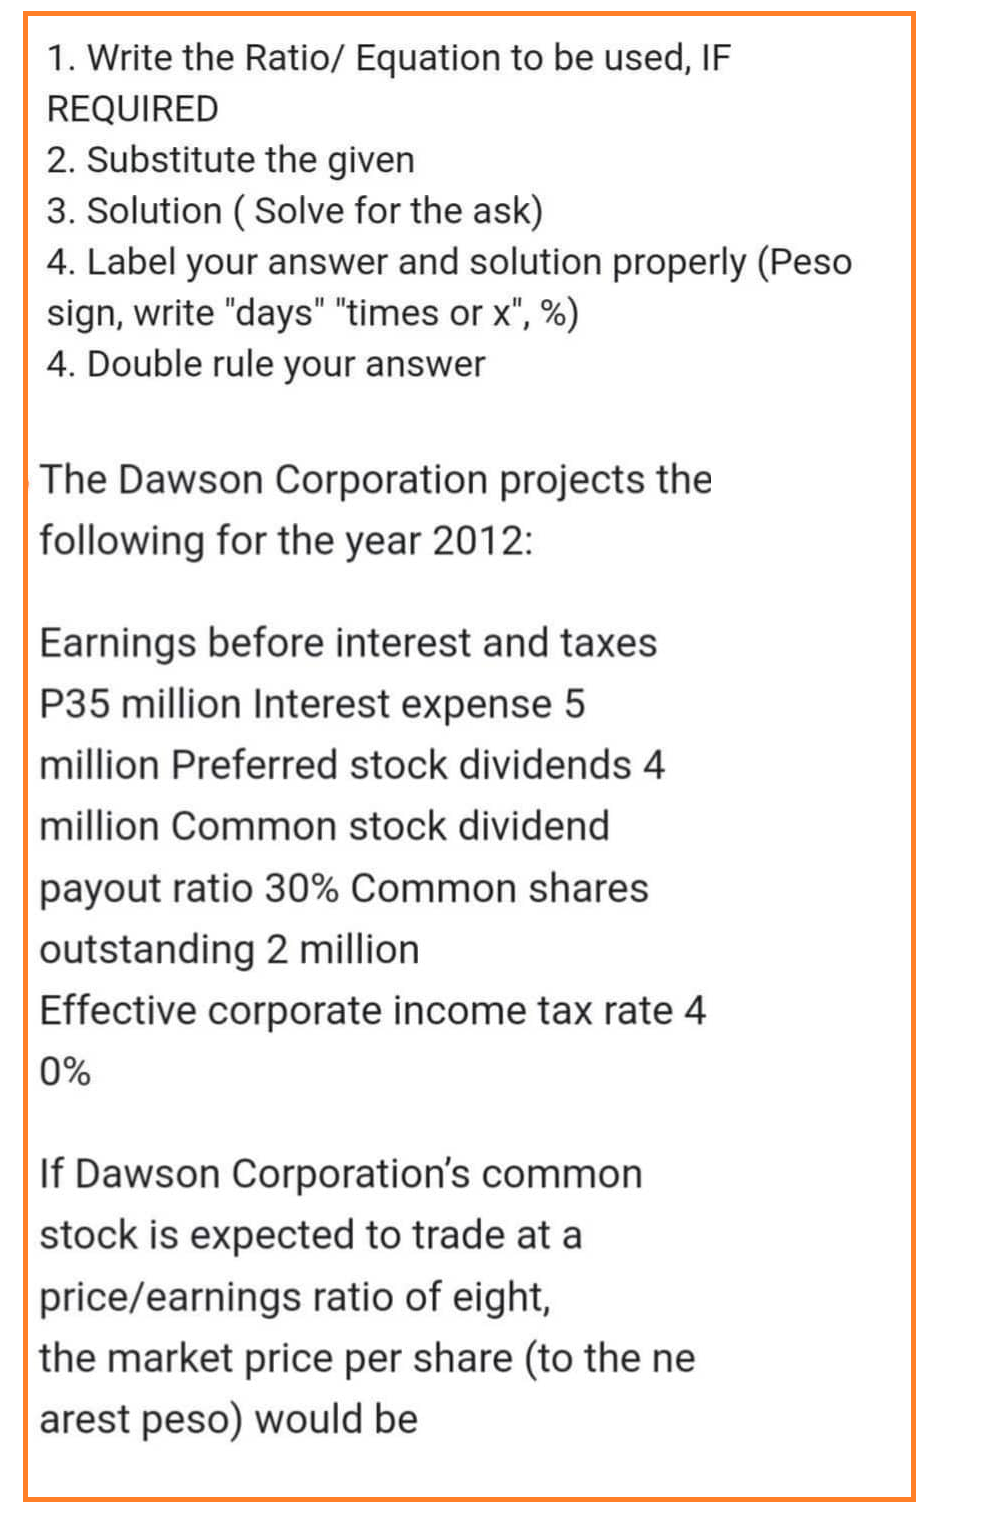 1. Write the Ratio/ Equation to be used, IF
REQUIRED
2. Substitute the given
3. Solution (Solve for the ask)
4. Label your answer and solution properly (Peso
sign, write "days" "times or x", %)
4. Double rule your answer
The Dawson Corporation projects the
following for the year 2012:
Earnings before interest and taxes
P35 million Interest expense 5
million Preferred stock dividends 4
million Common stock dividend
payout ratio 30% Common shares
outstanding 2 million
Effective corporate income tax rate 4
0%
If Dawson Corporation's common
stock is expected to trade at a
price/earnings ratio of eight,
the market price per share (to the ne
arest peso) would be